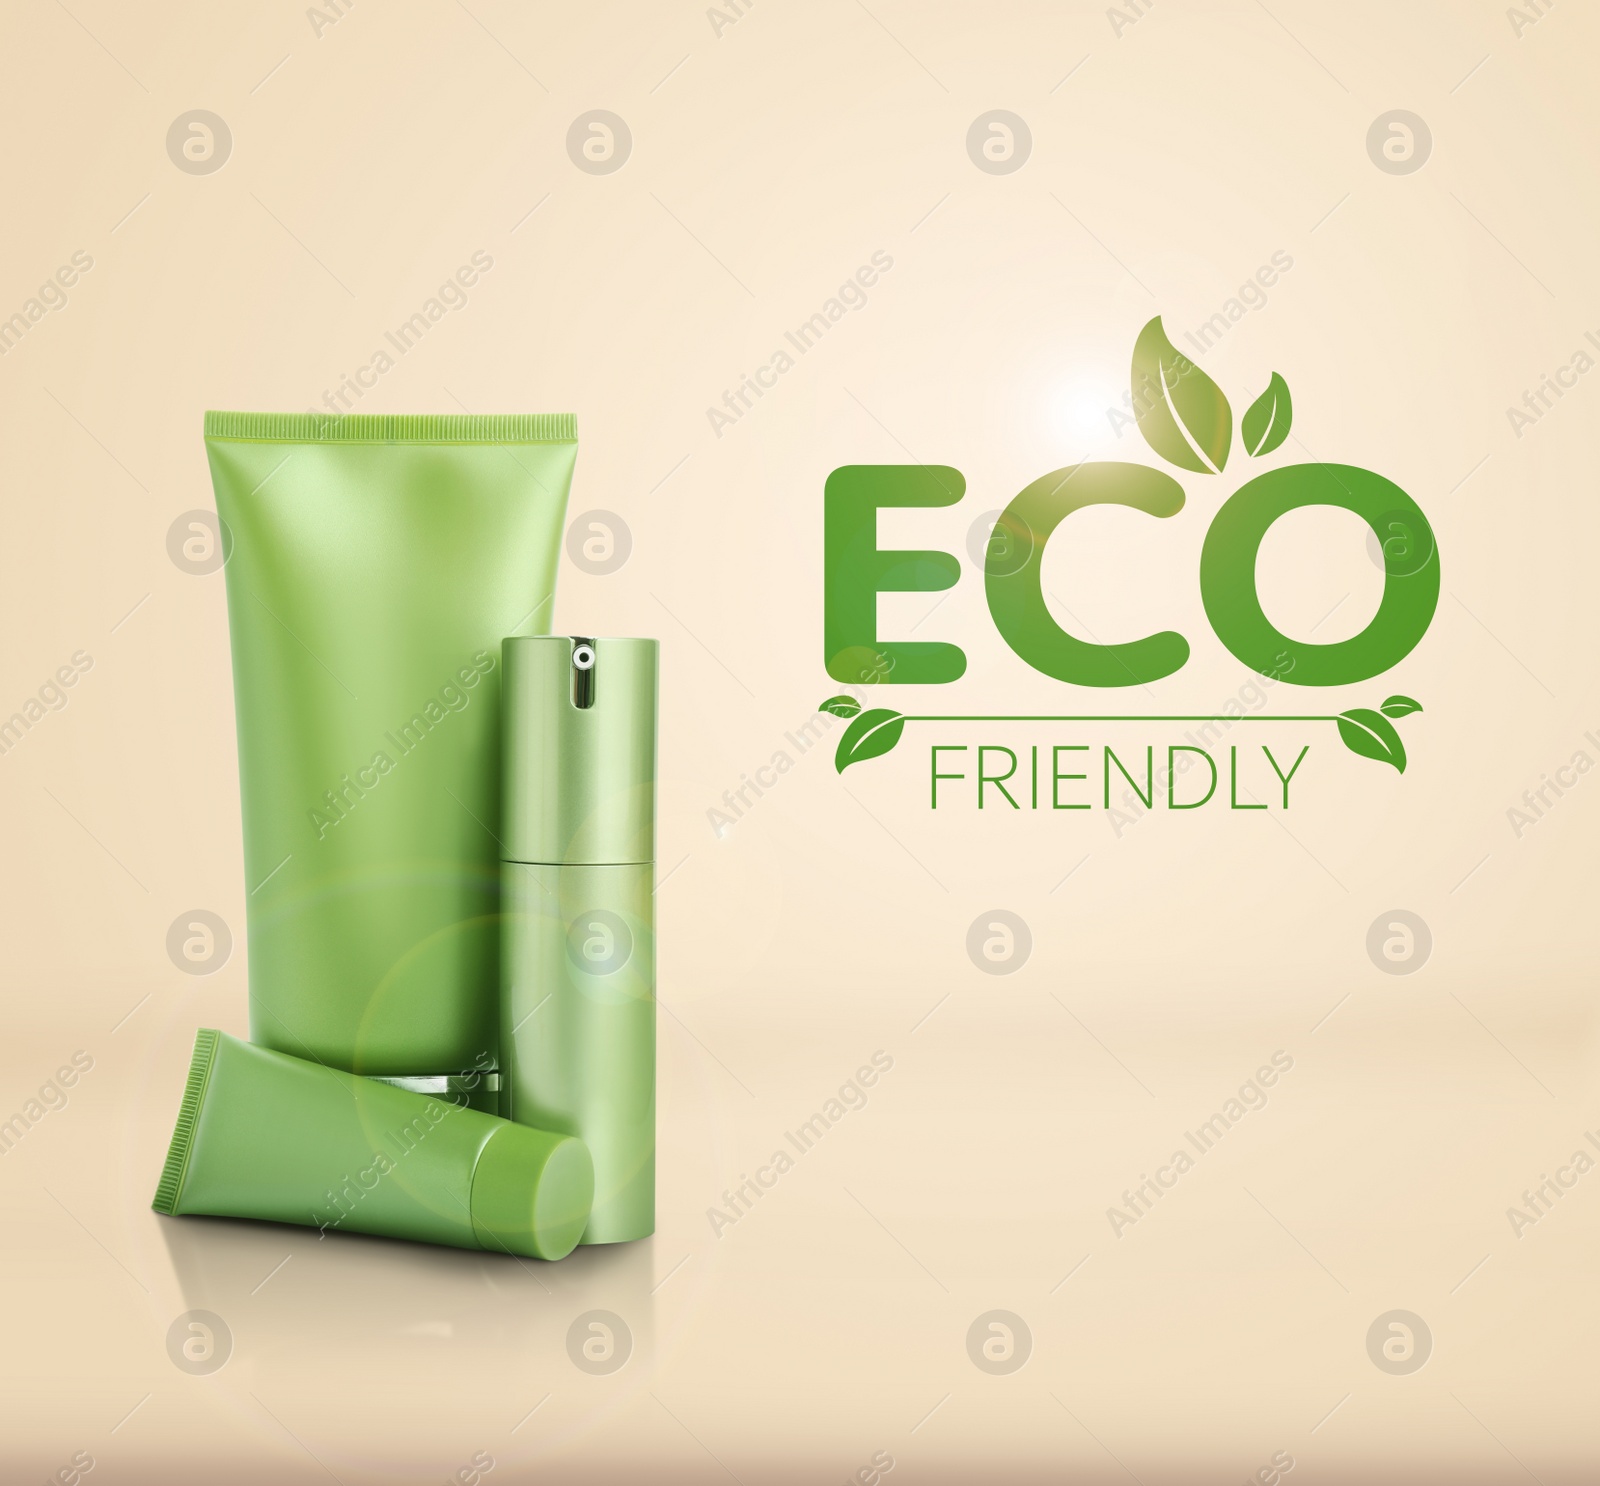 Image of Organic eco friendly cosmetic products on beige background